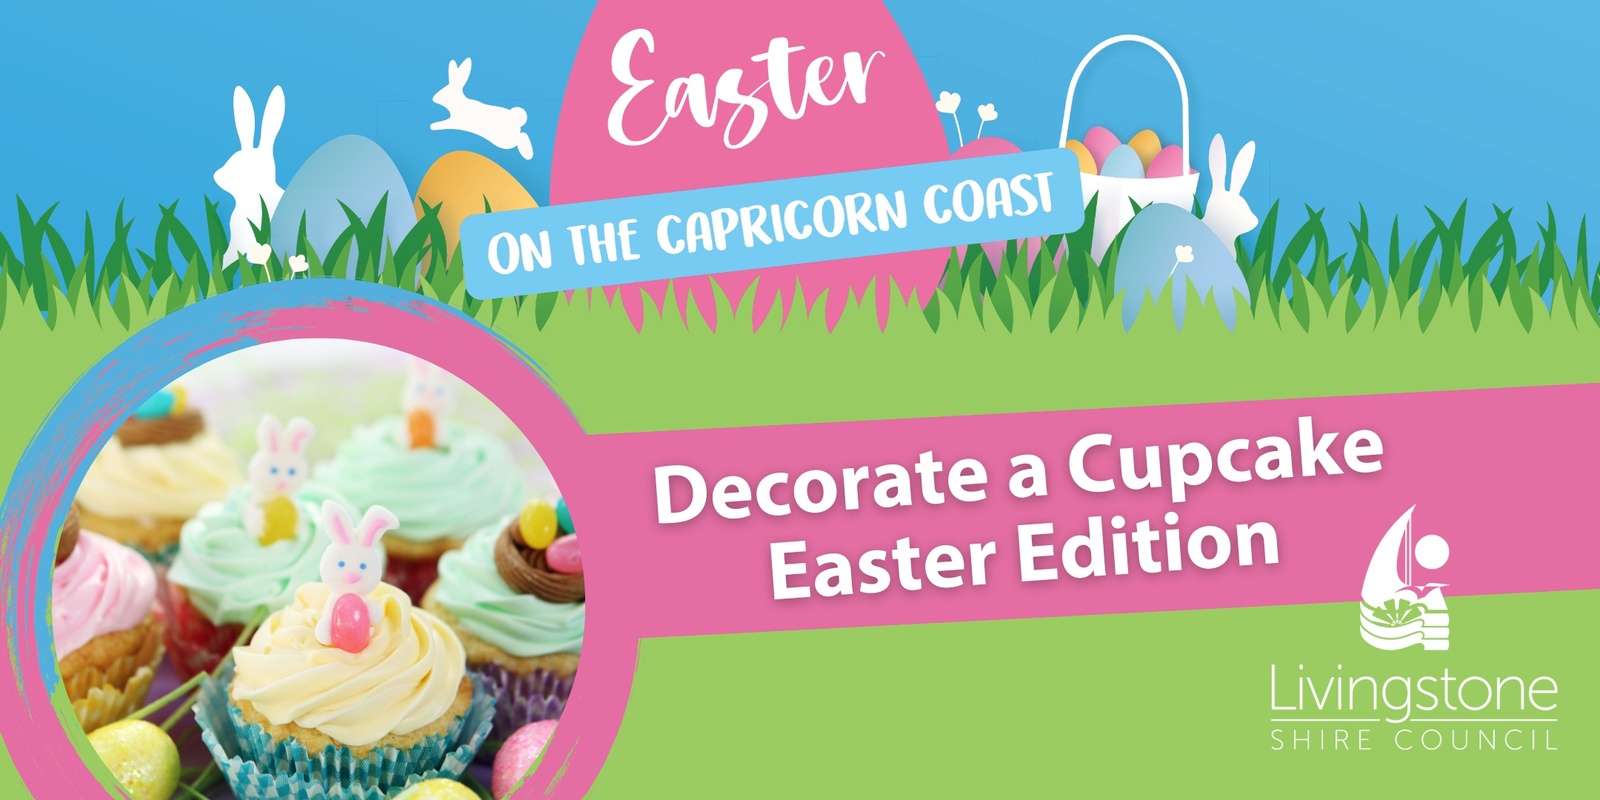 Banner image for Decorate-A-Cupcake Easter Edition